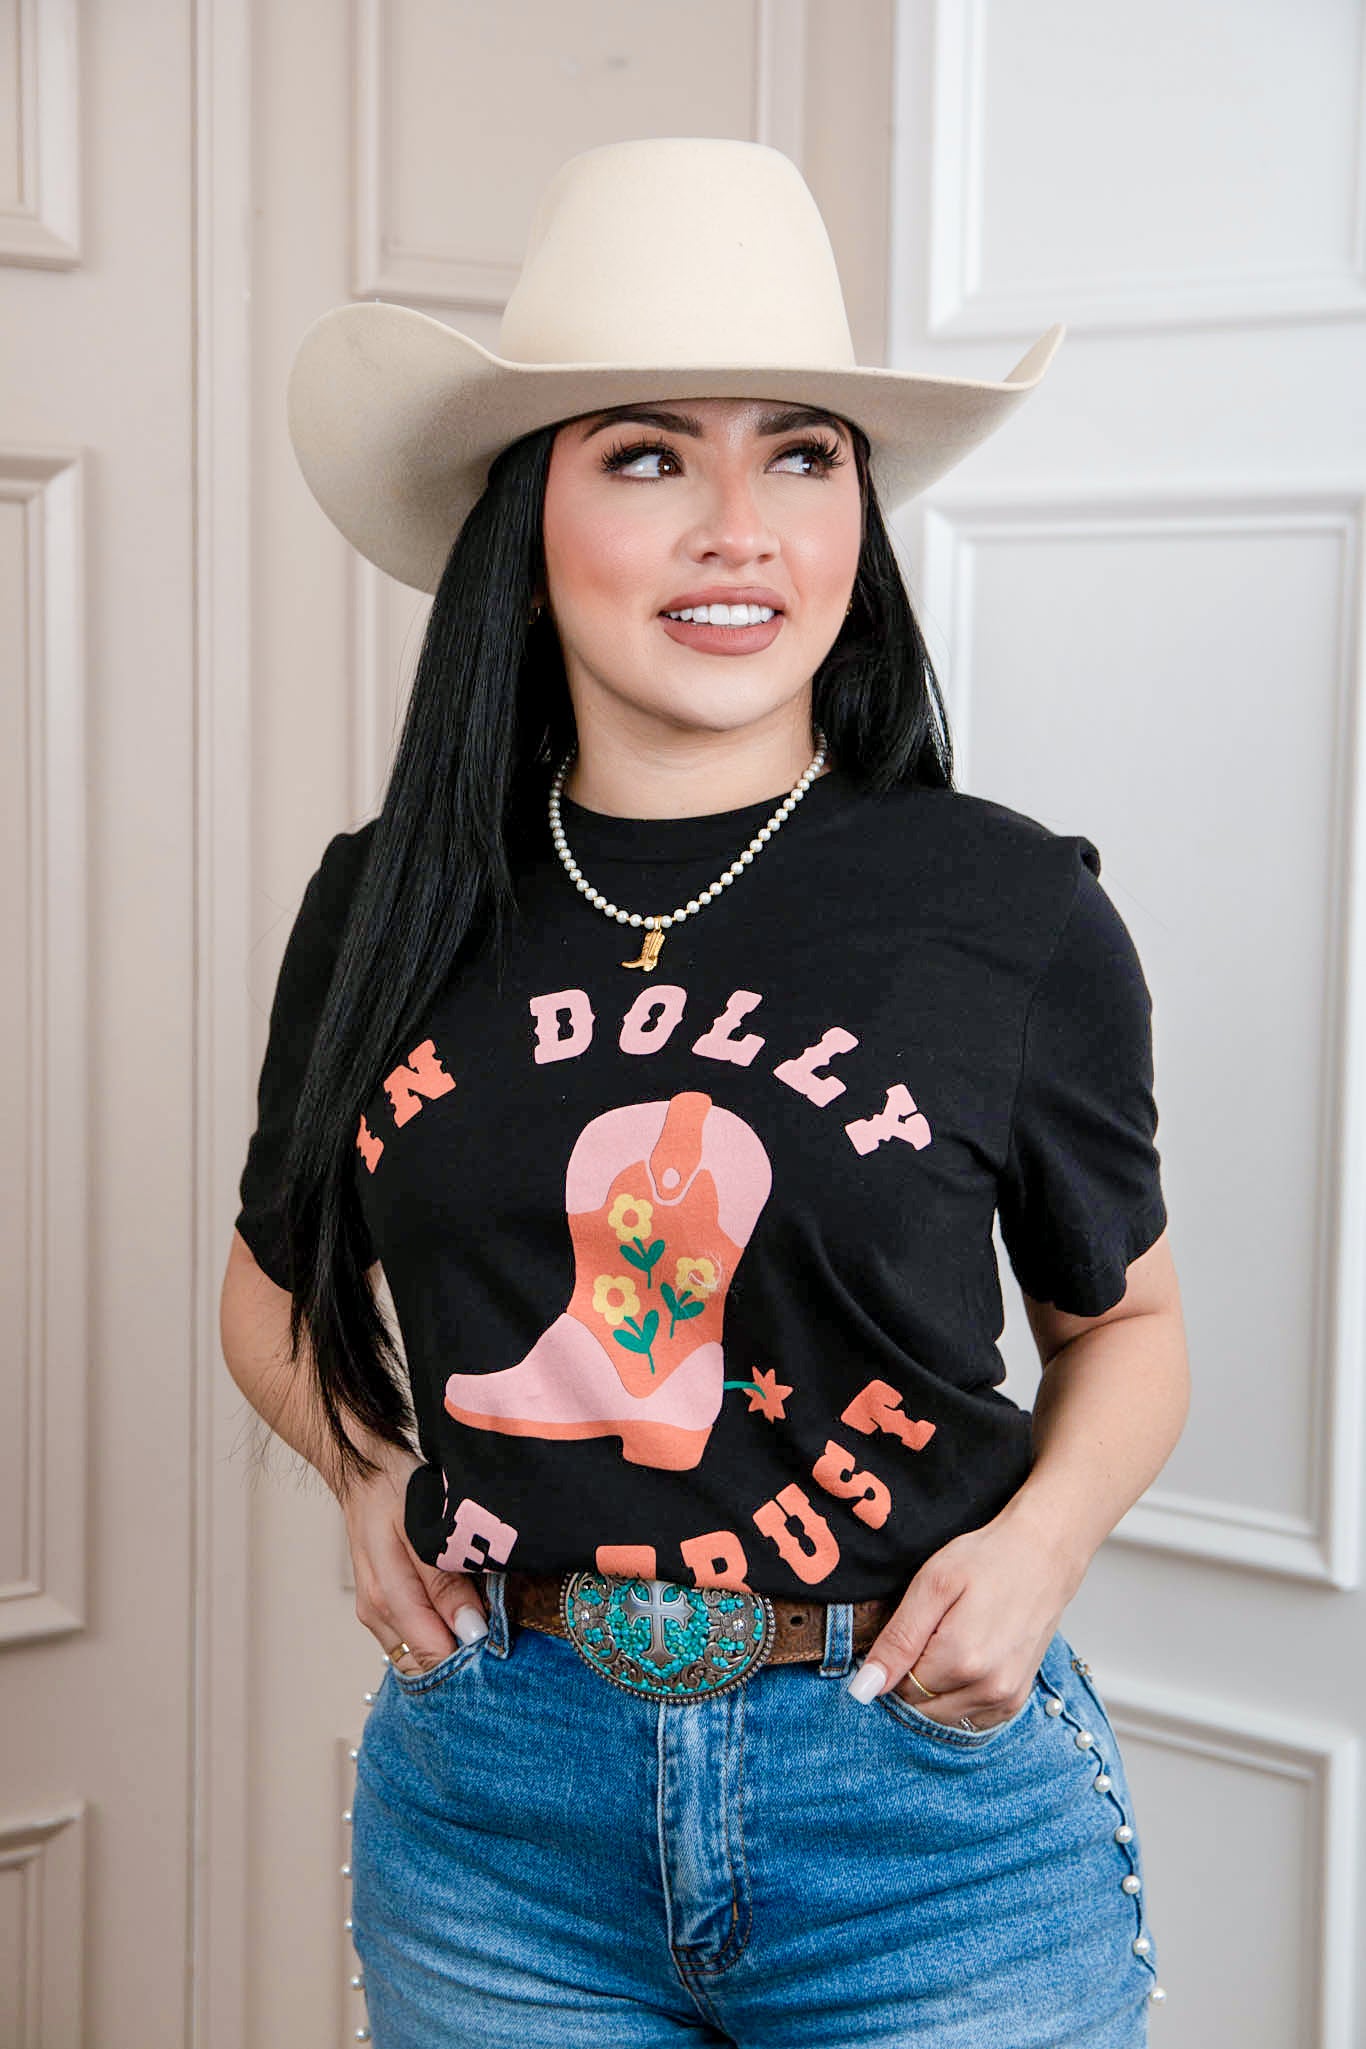 In Dolly We Trust Graphic Tee JJ